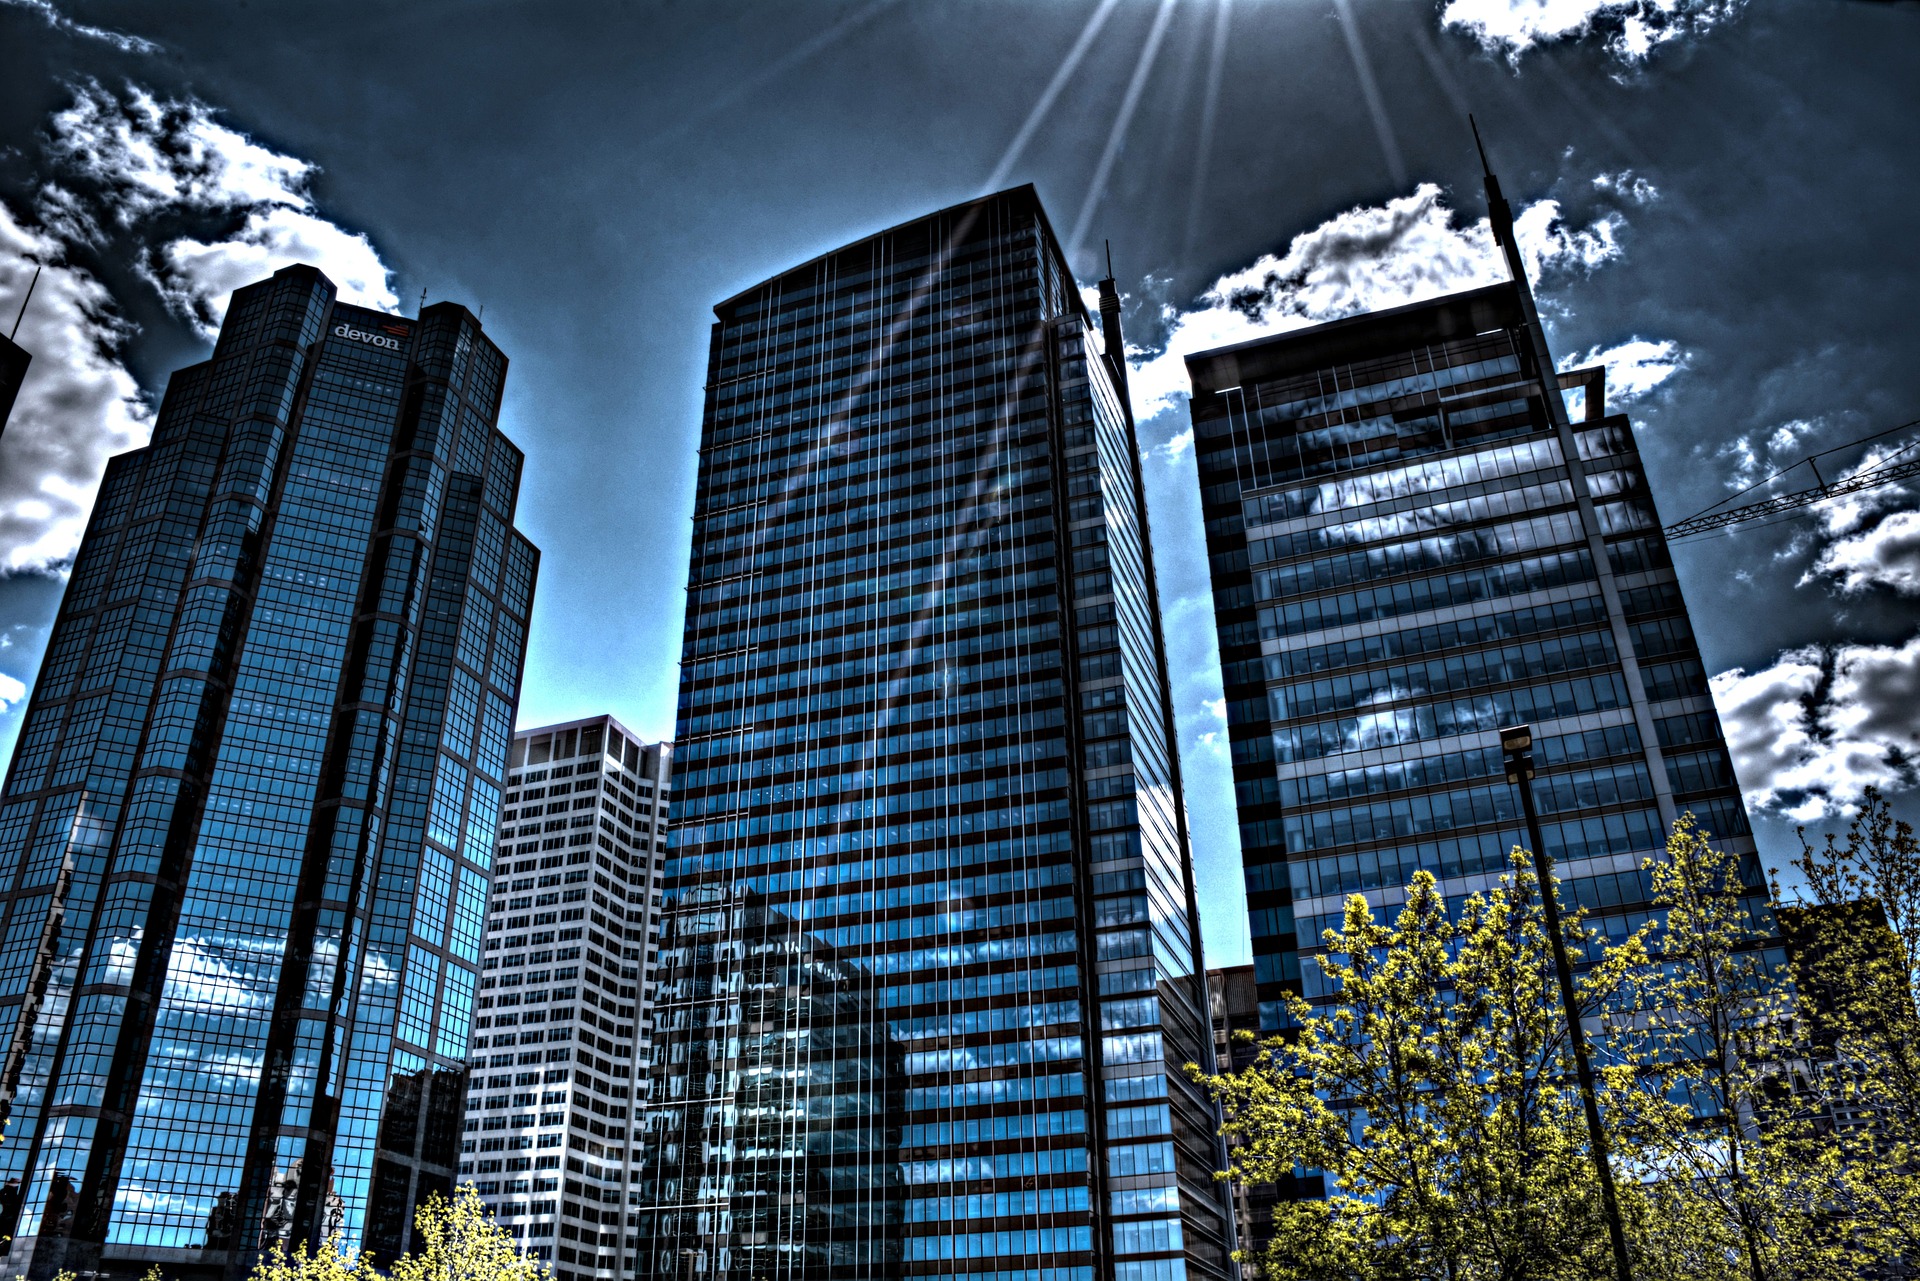 An image of tall blue skyscrapers in front of a blue sky with white fluffy clouds in Calgary, Alberta, Canada